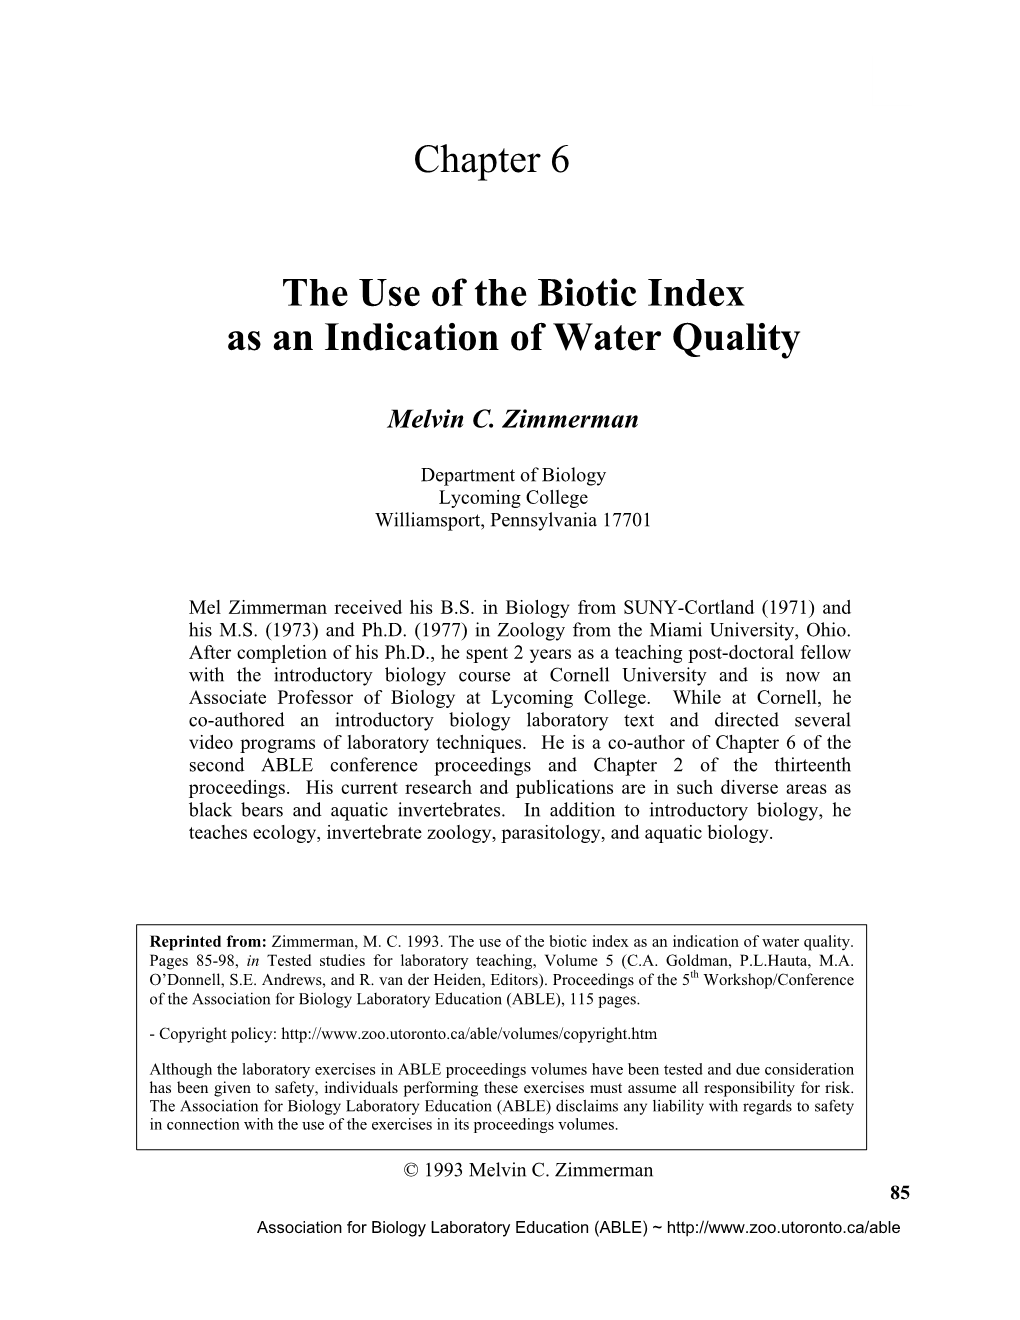 Chapter 6 the Use of the Biotic Index As an Indication of Water Quality